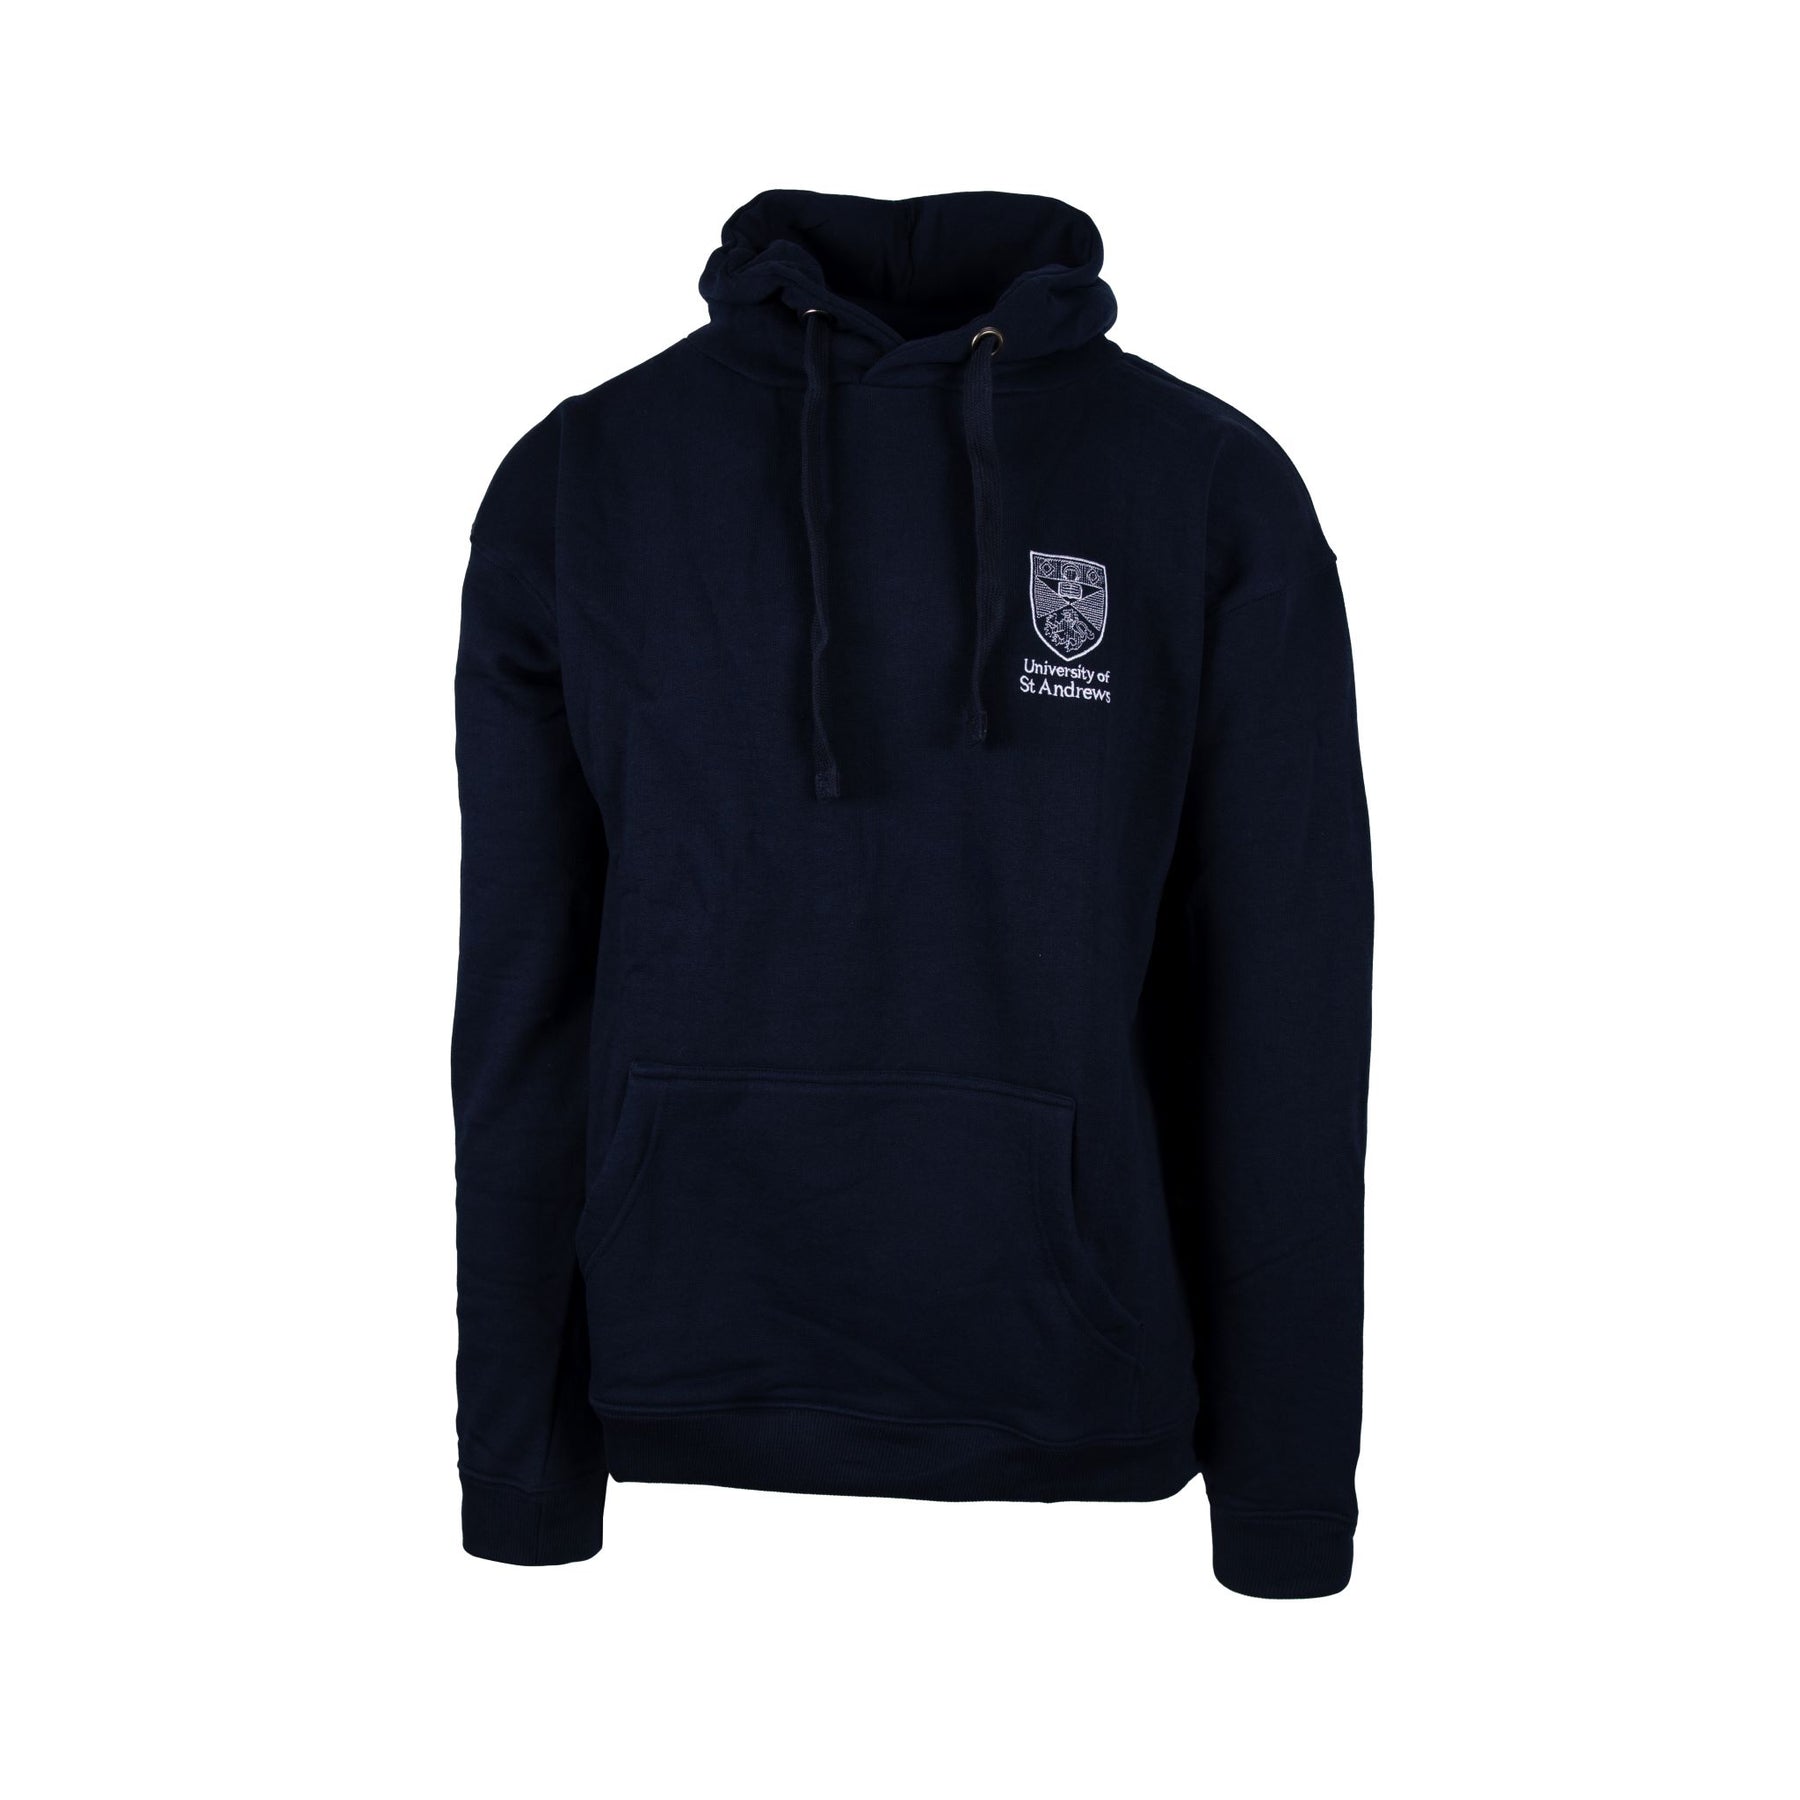 Andrew Melville Hall Hoodie – University of St Andrews Shop